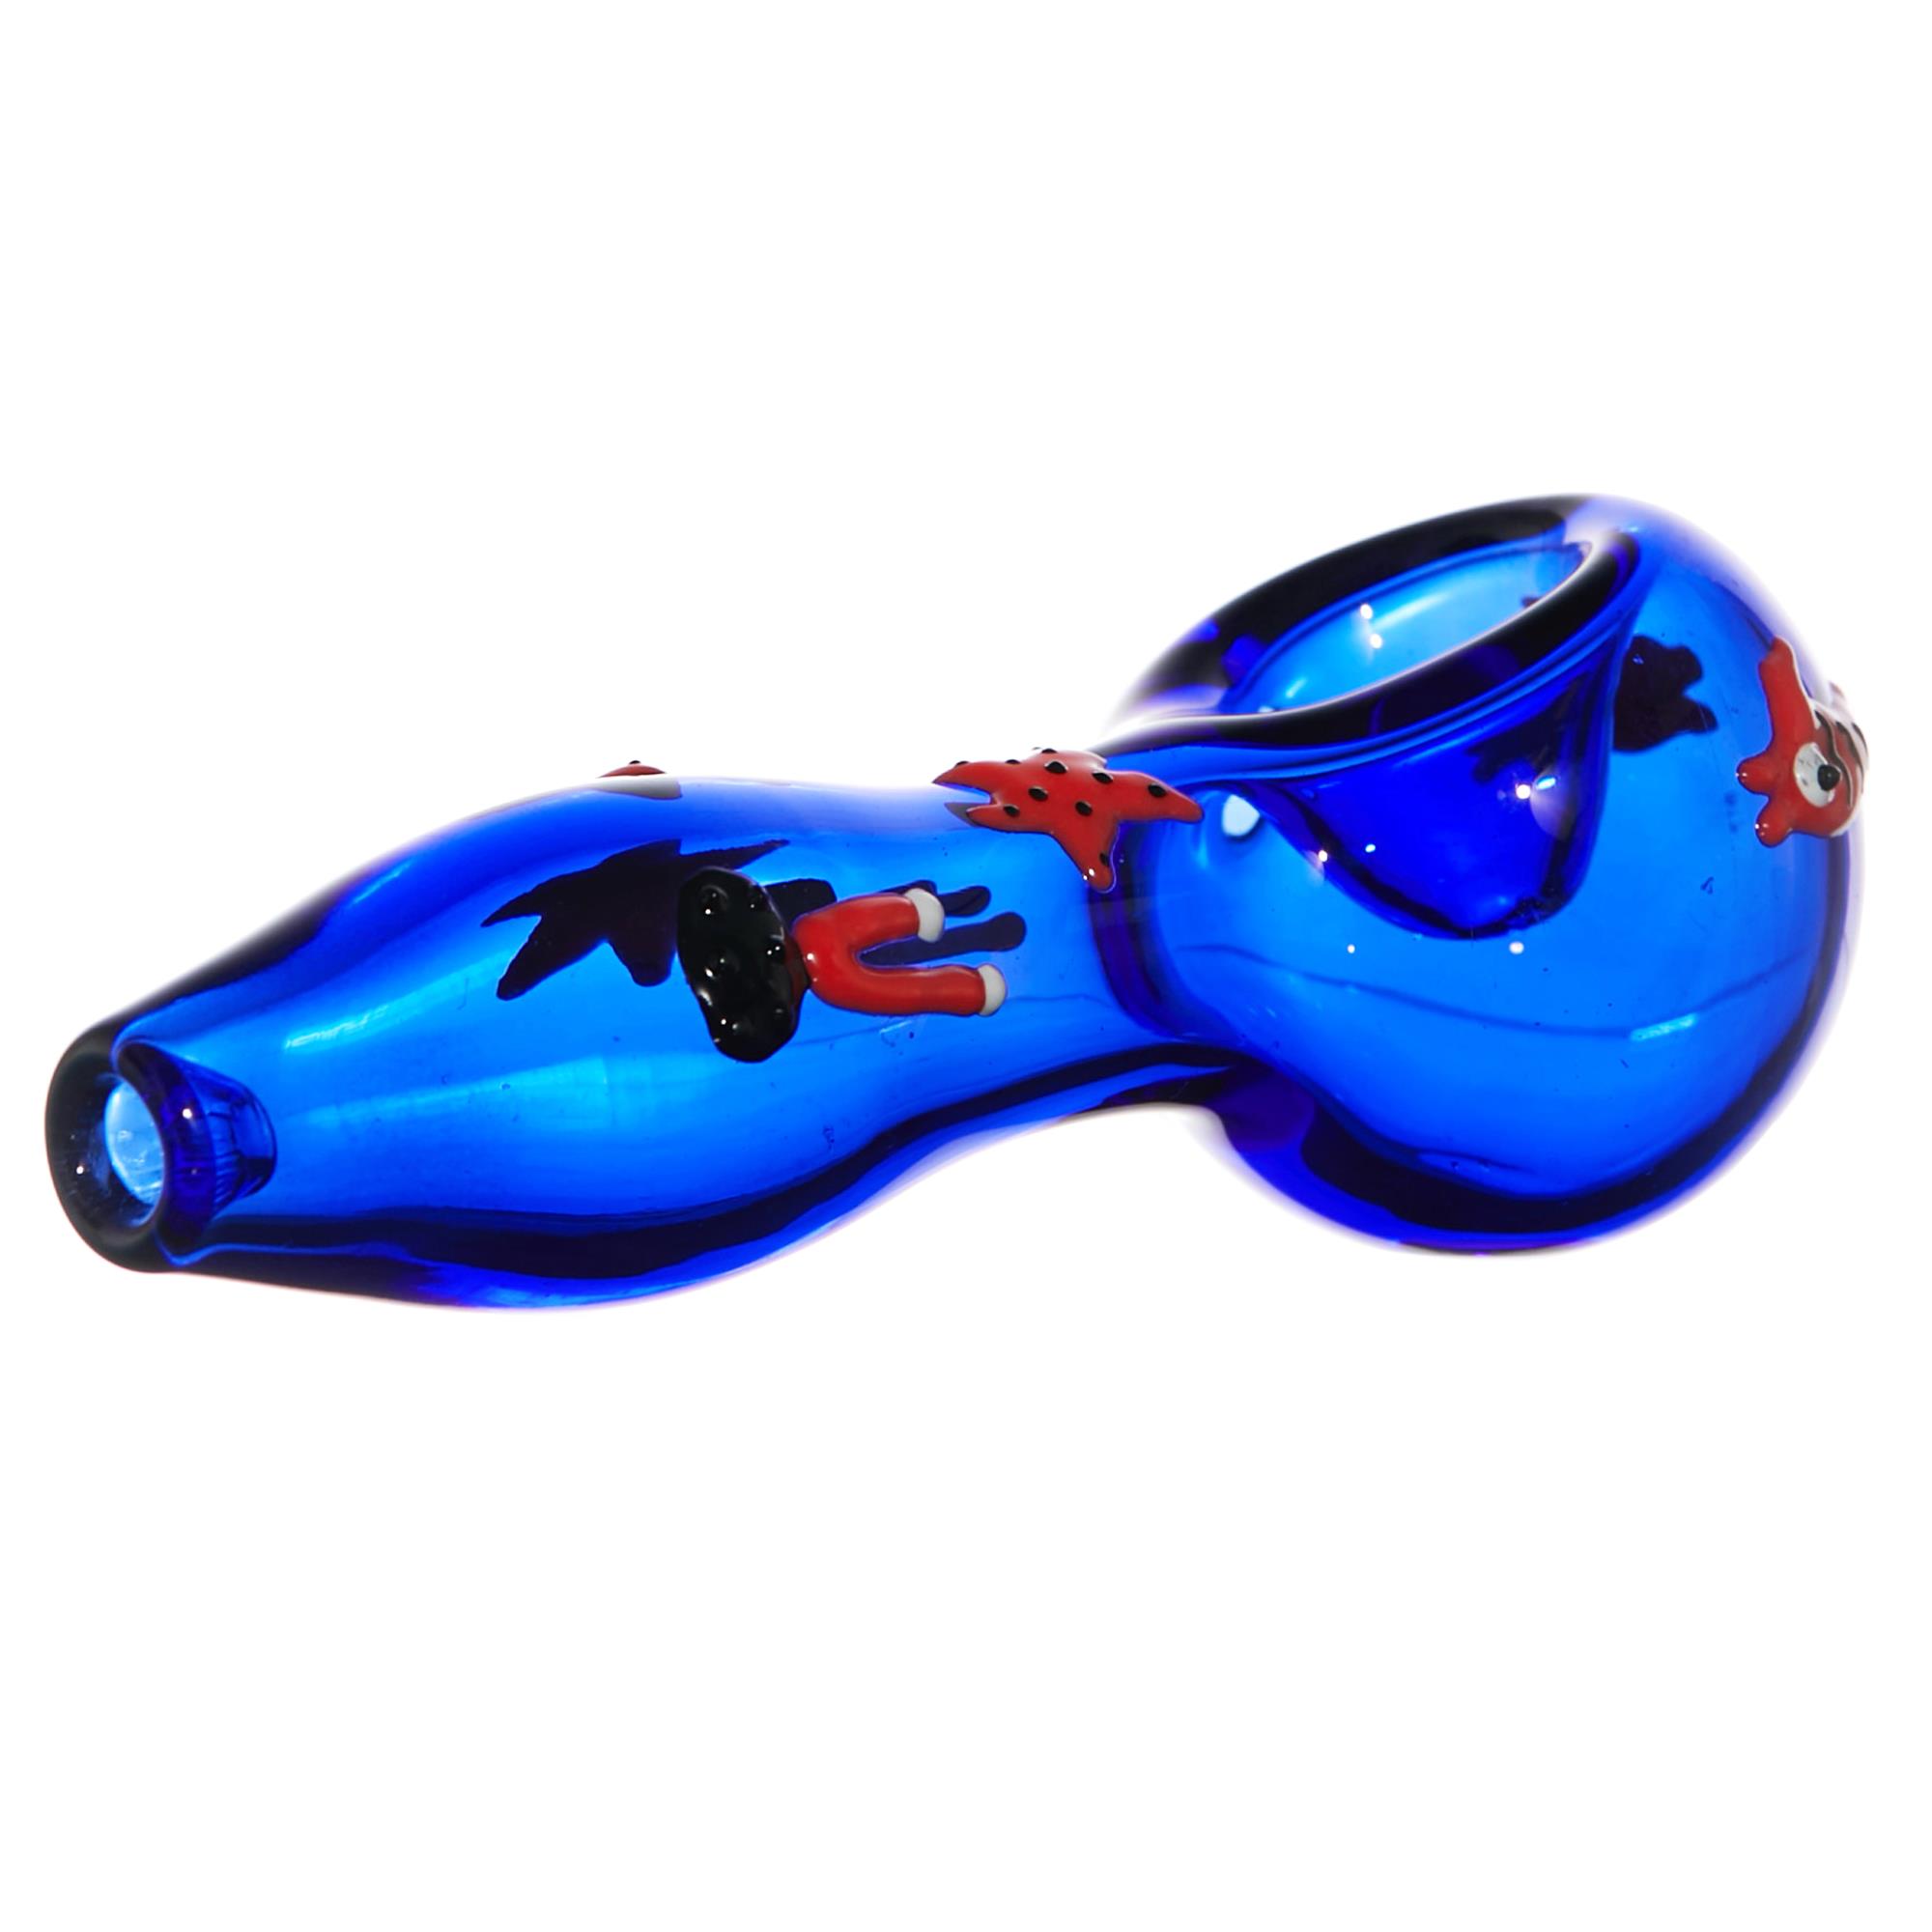 BLUE AND RED STARFISH SPOON PIPE